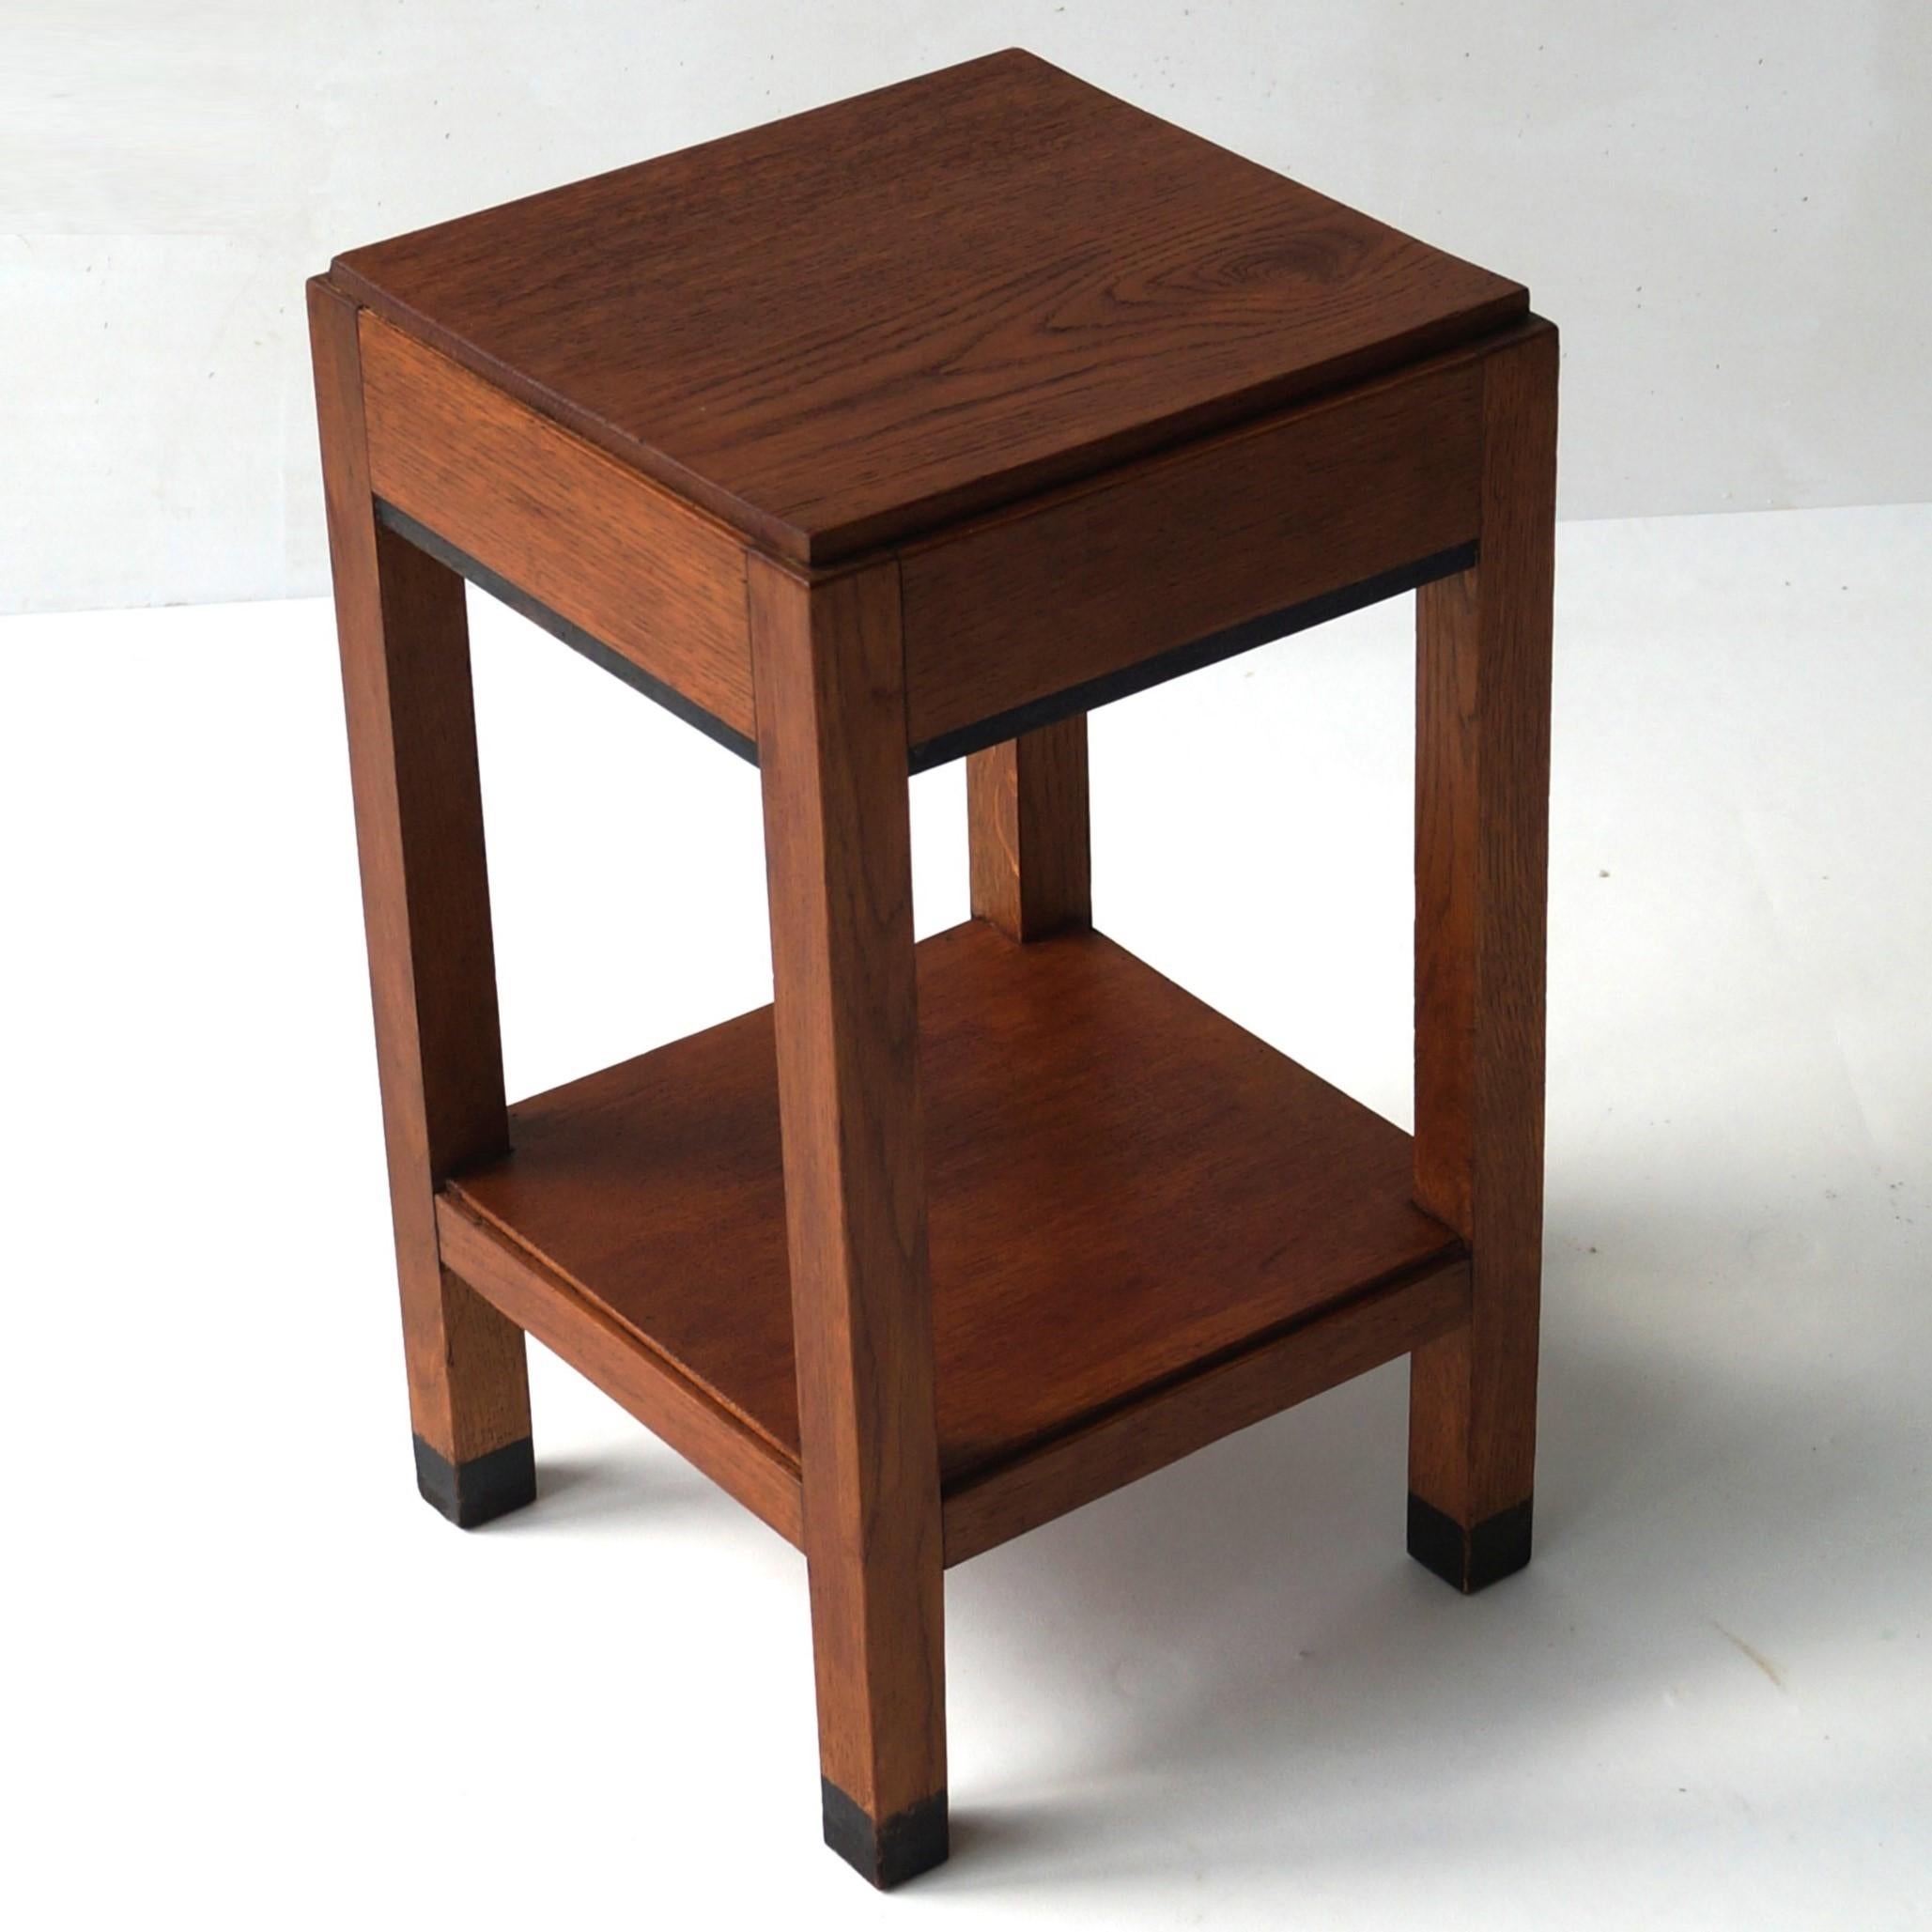 A small Dutch side table, typically Haagse School (The Hague School), 1920s. This table will fit in very well with other pieces in the same style and is ideal as a display table for a sculpture or a plant. The piece is made of solid oak and has